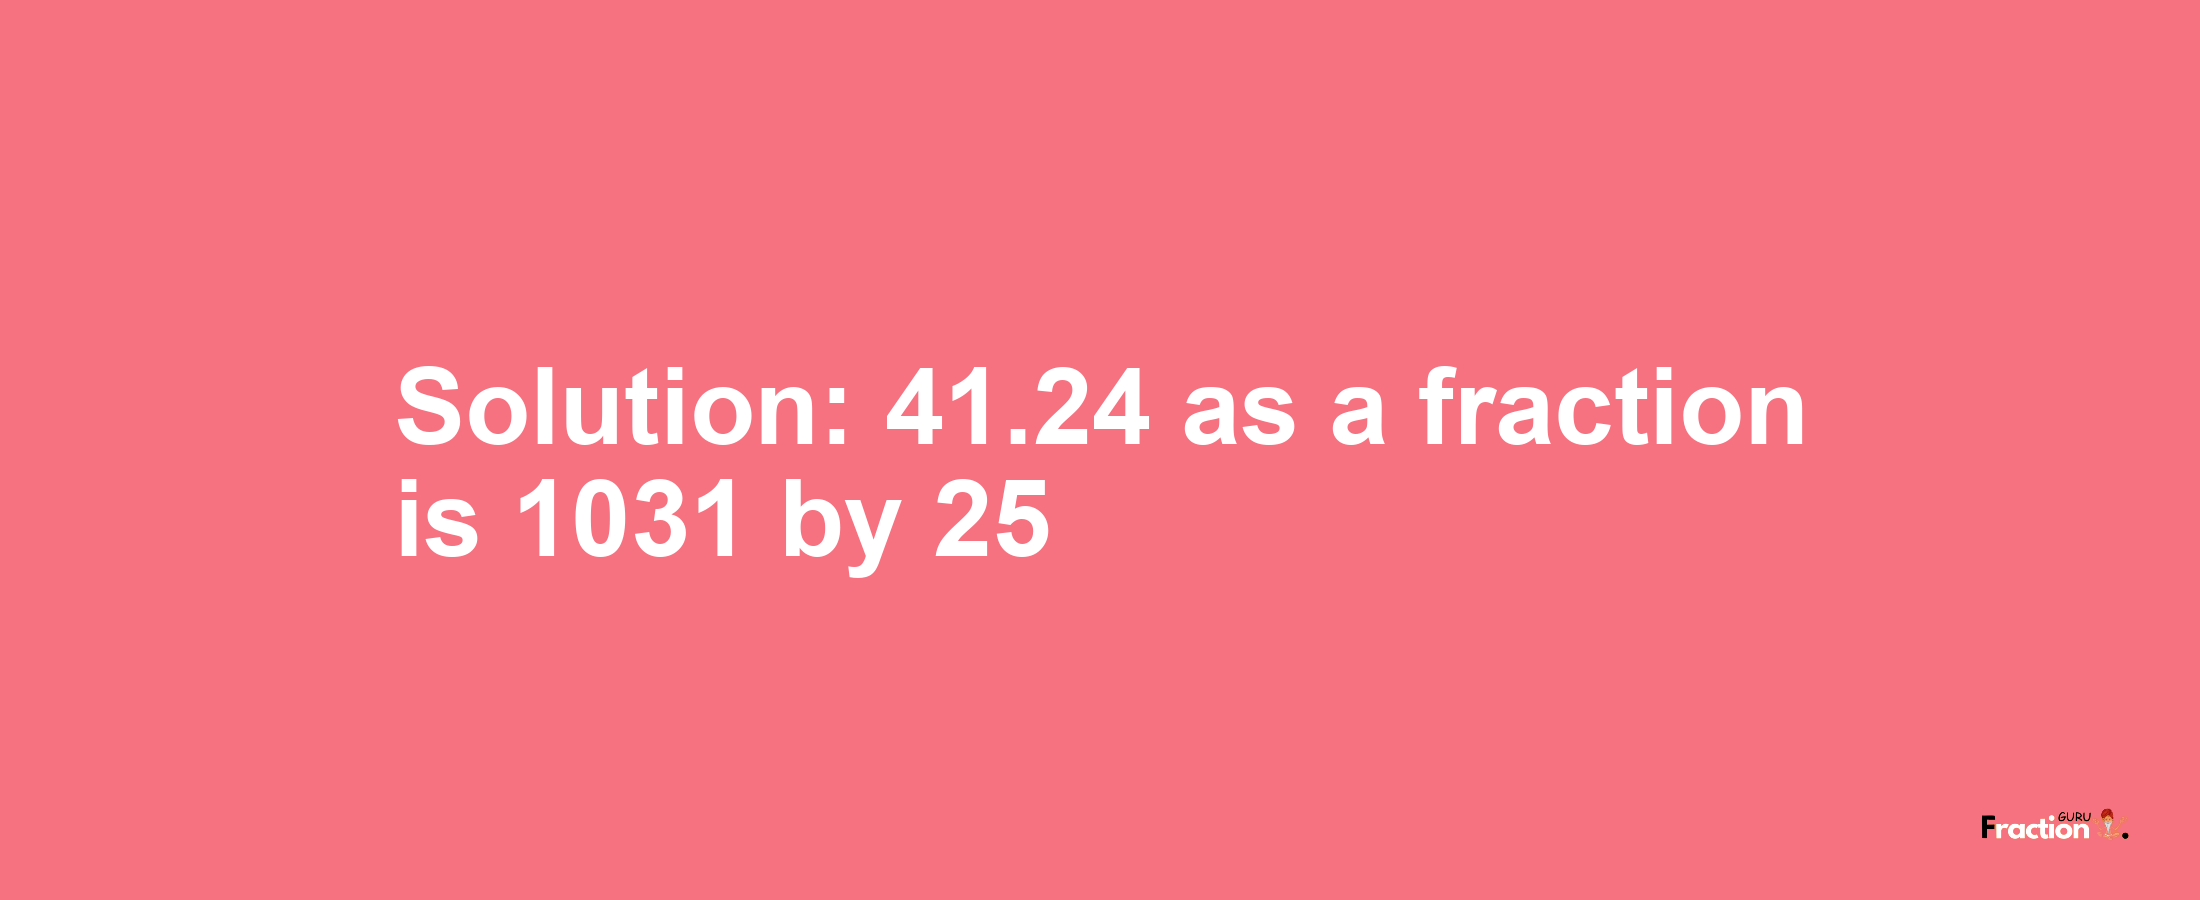 Solution:41.24 as a fraction is 1031/25